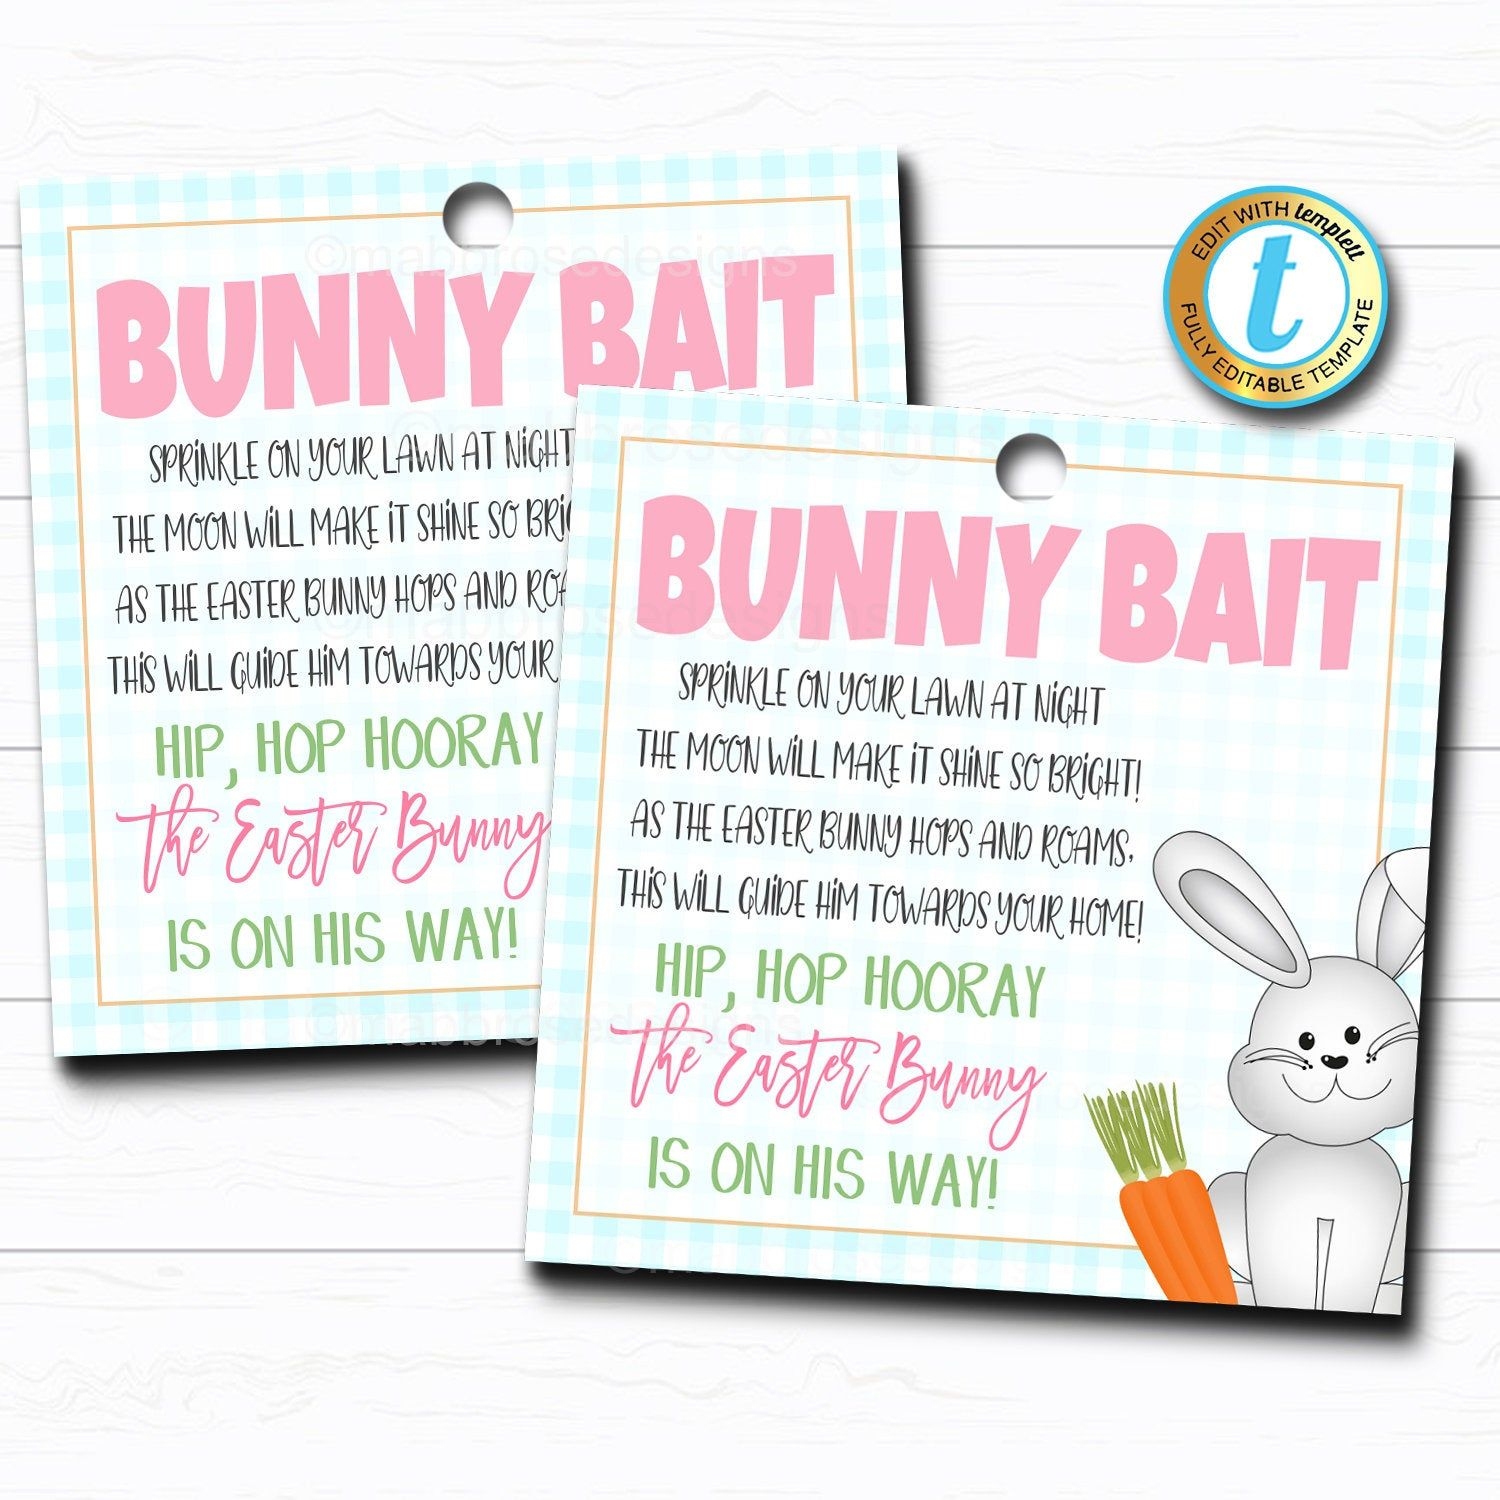 Easter Bunny Bait Printable Gift Tags Kids Easter Eve Activity Easter Basket Party Favor Tags DIY Instant Download Editable Template Etsy Bunny Bait Printable Bunny Bait Easter Basket Party Favors